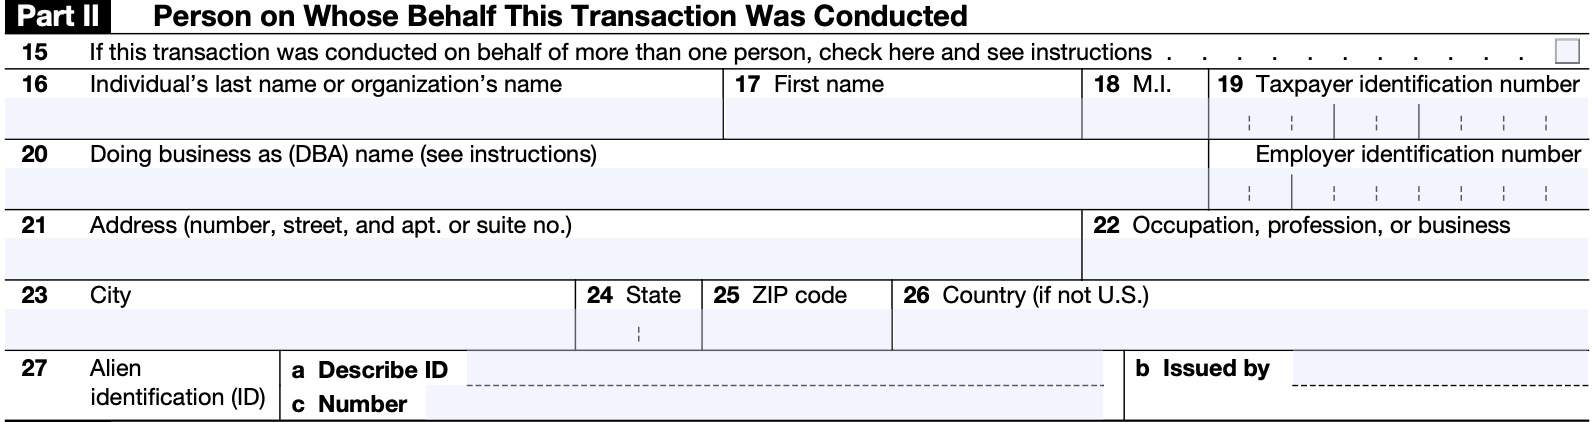 irs form 8300, part II: person on whose behalf this transaction was conducted